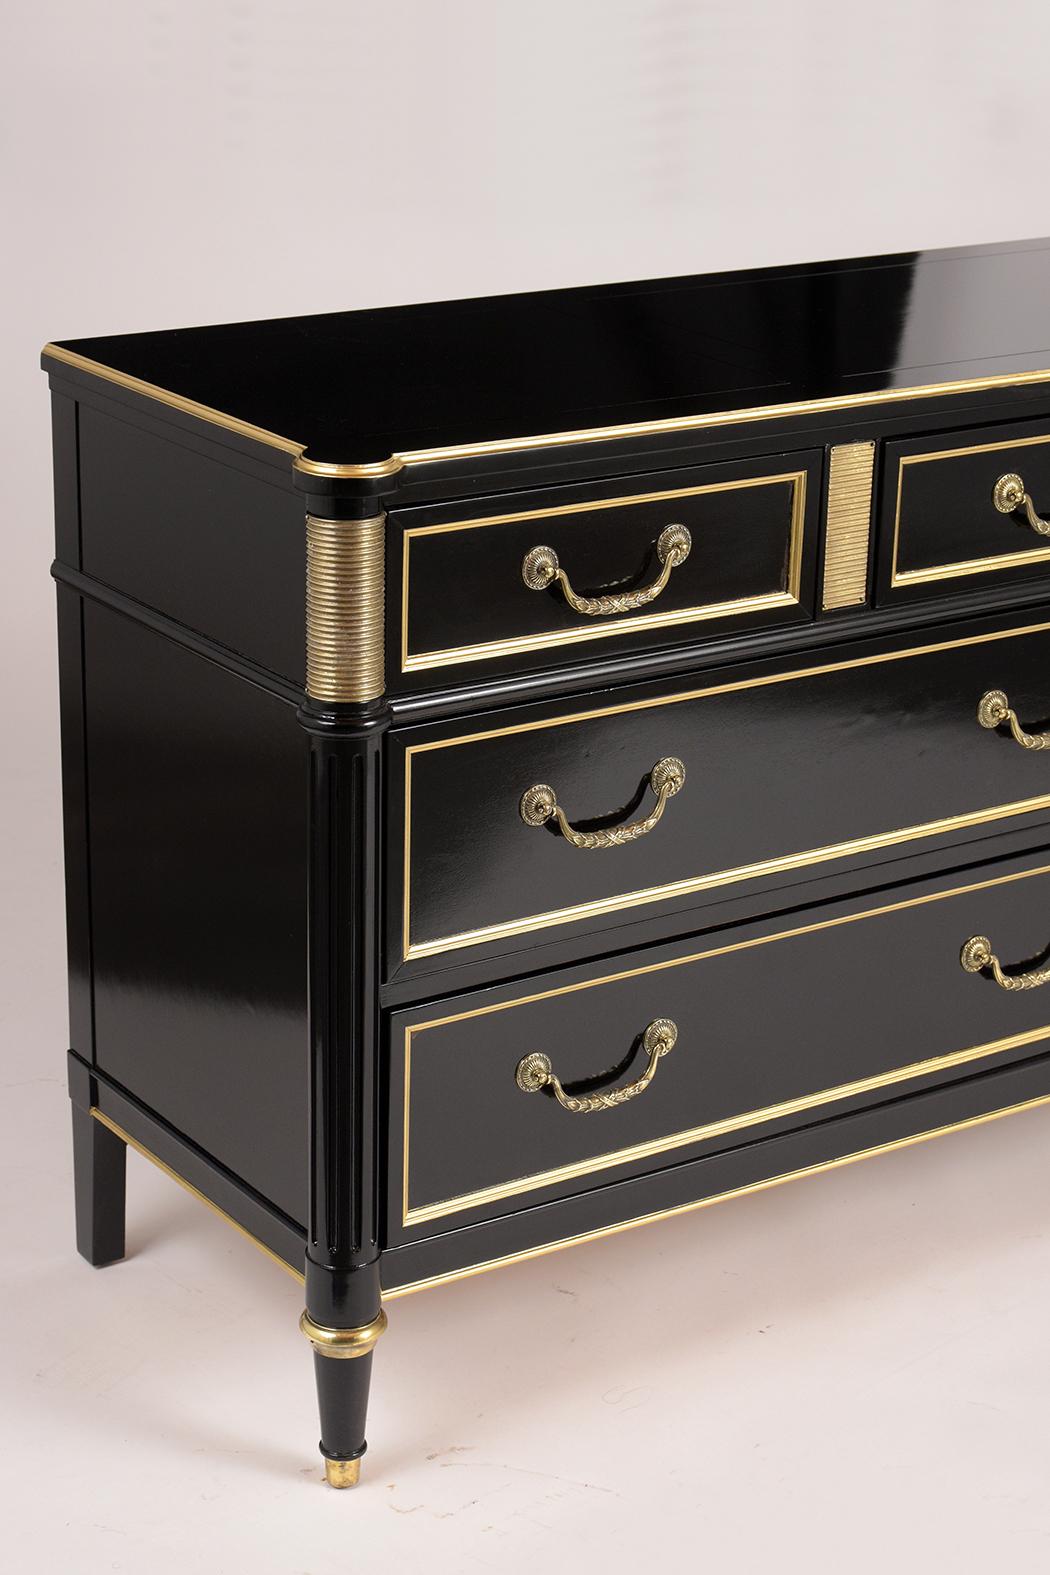 Carved Black Lacquered Dresser by Baker on the Louis XVI Style